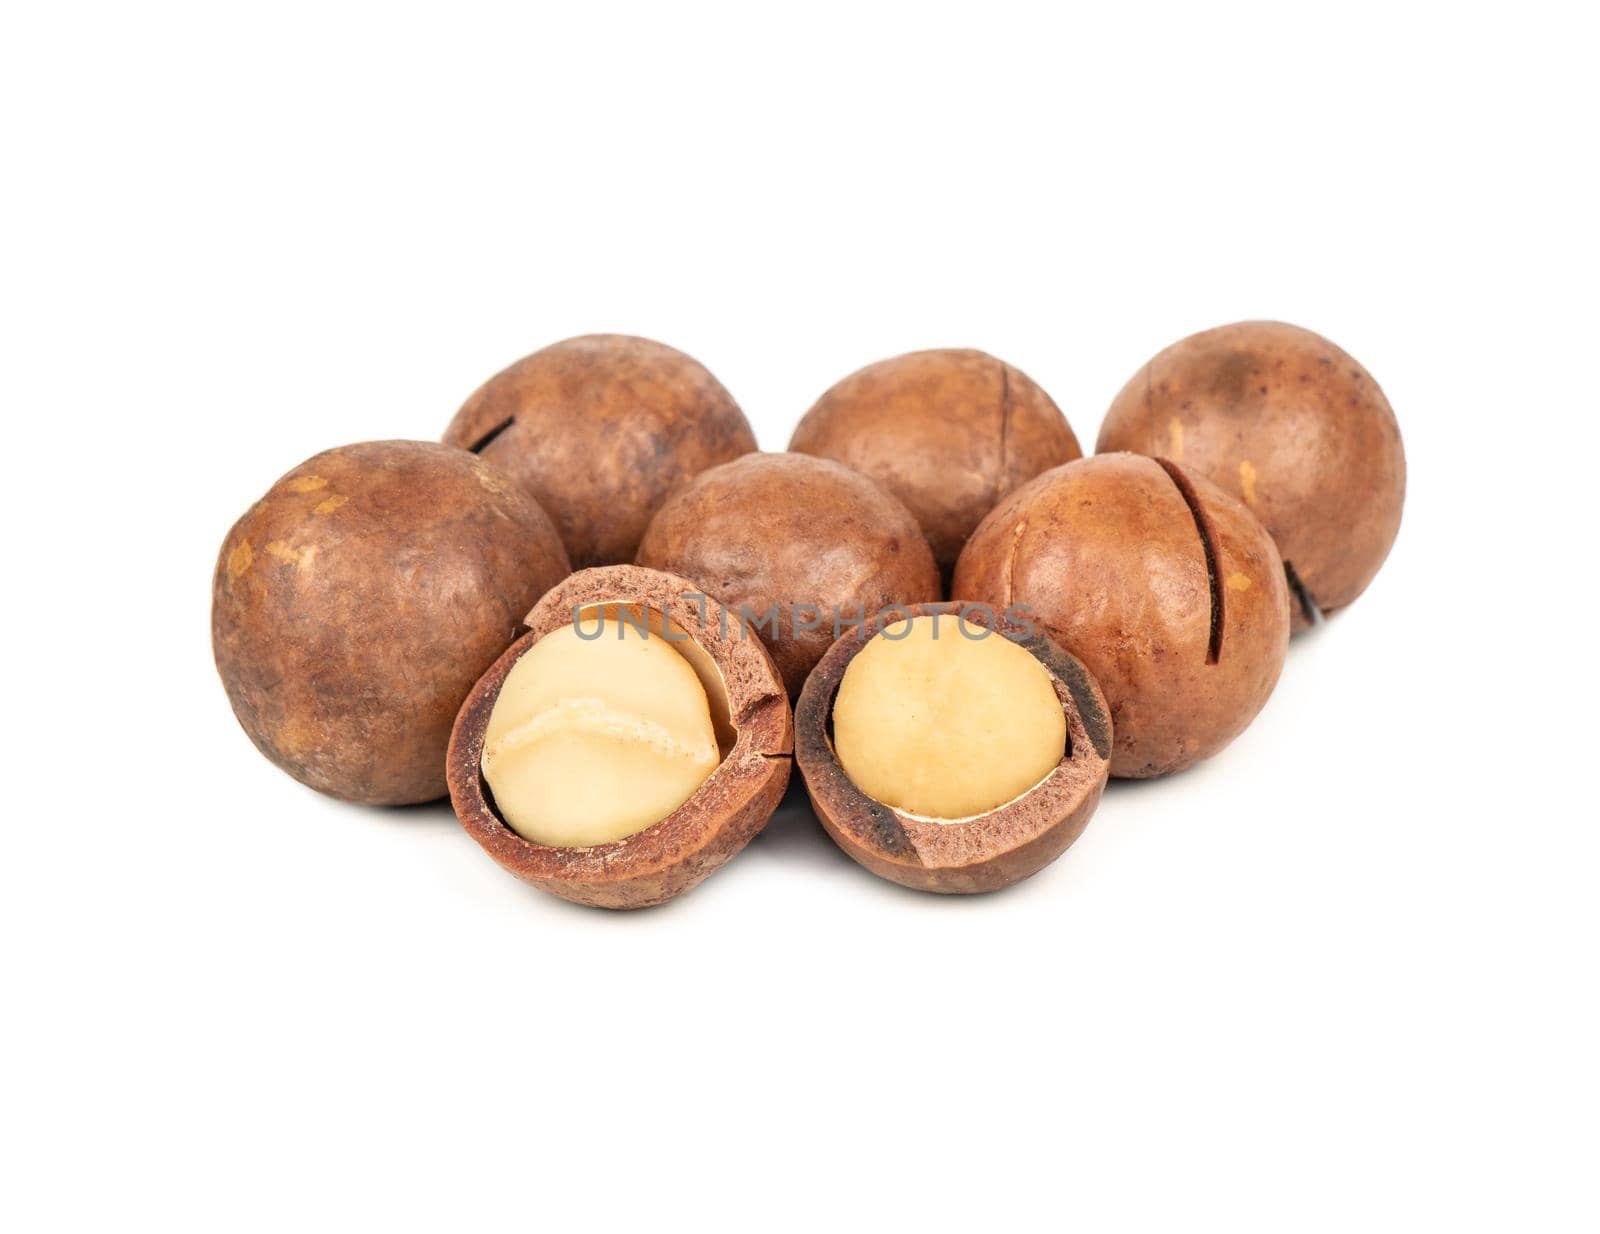 Macadamia nuts in a shell and without on a white background